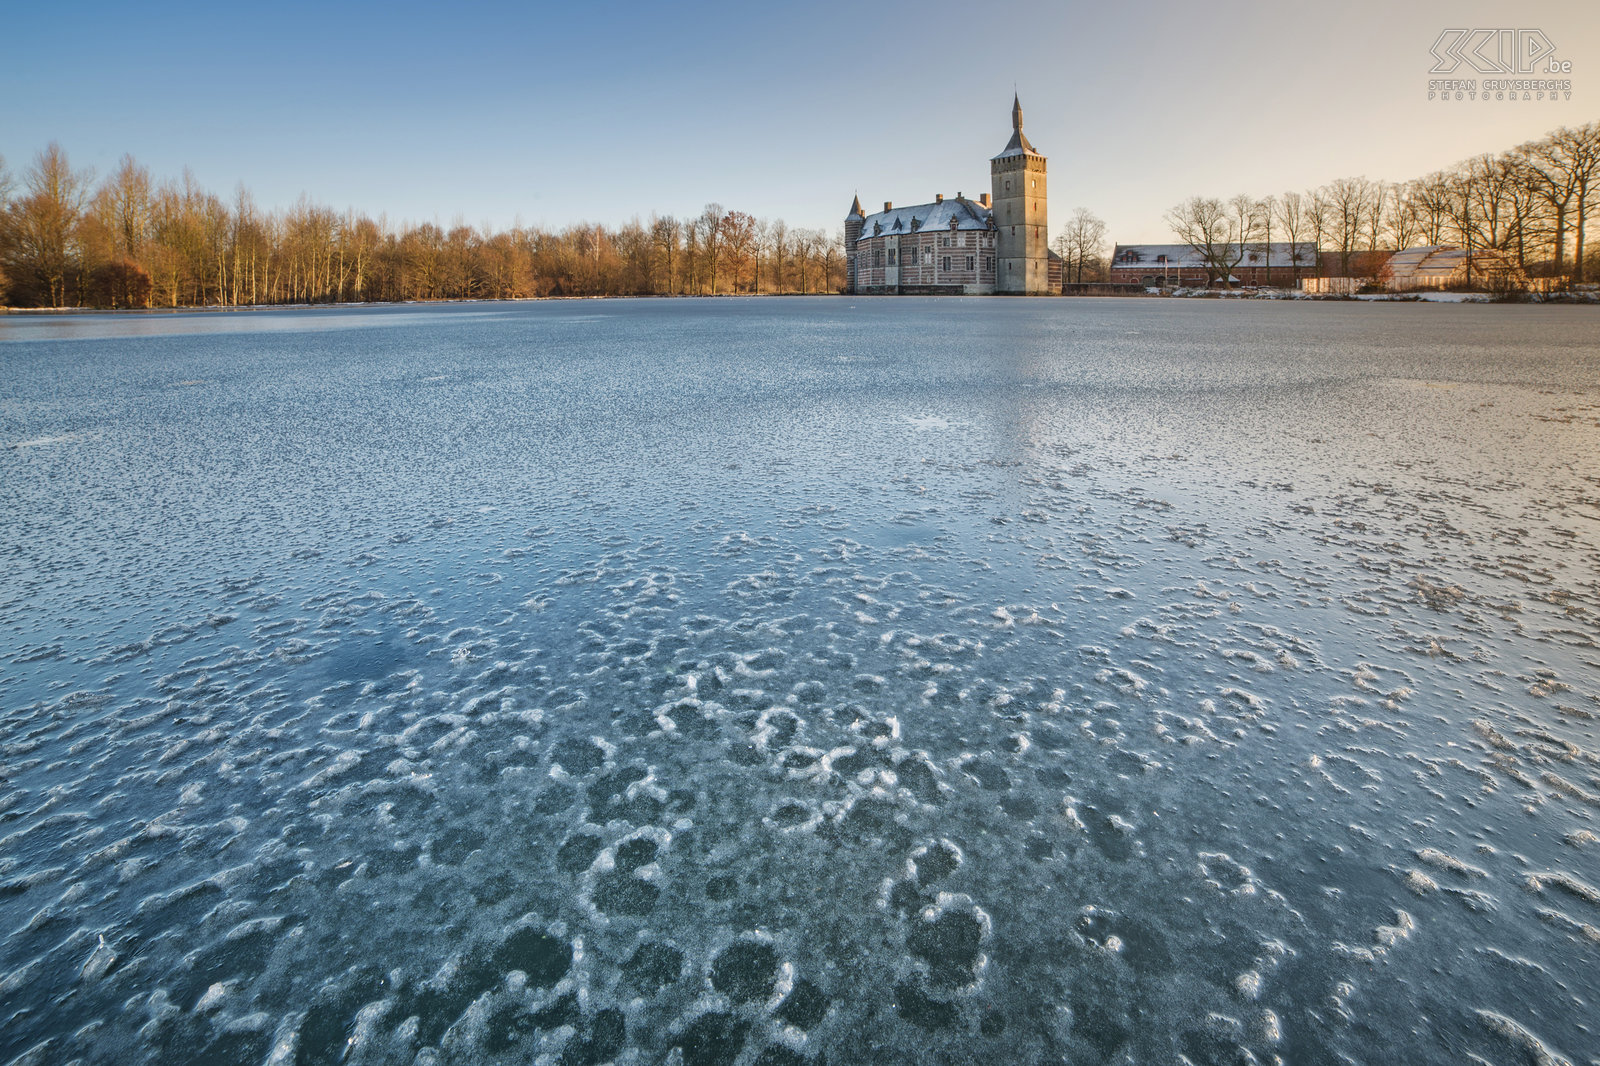 Winter in Sint-Pieters-Rode - Frozen pool The frozen pool with ice formations at the castle of Horst. Stefan Cruysberghs